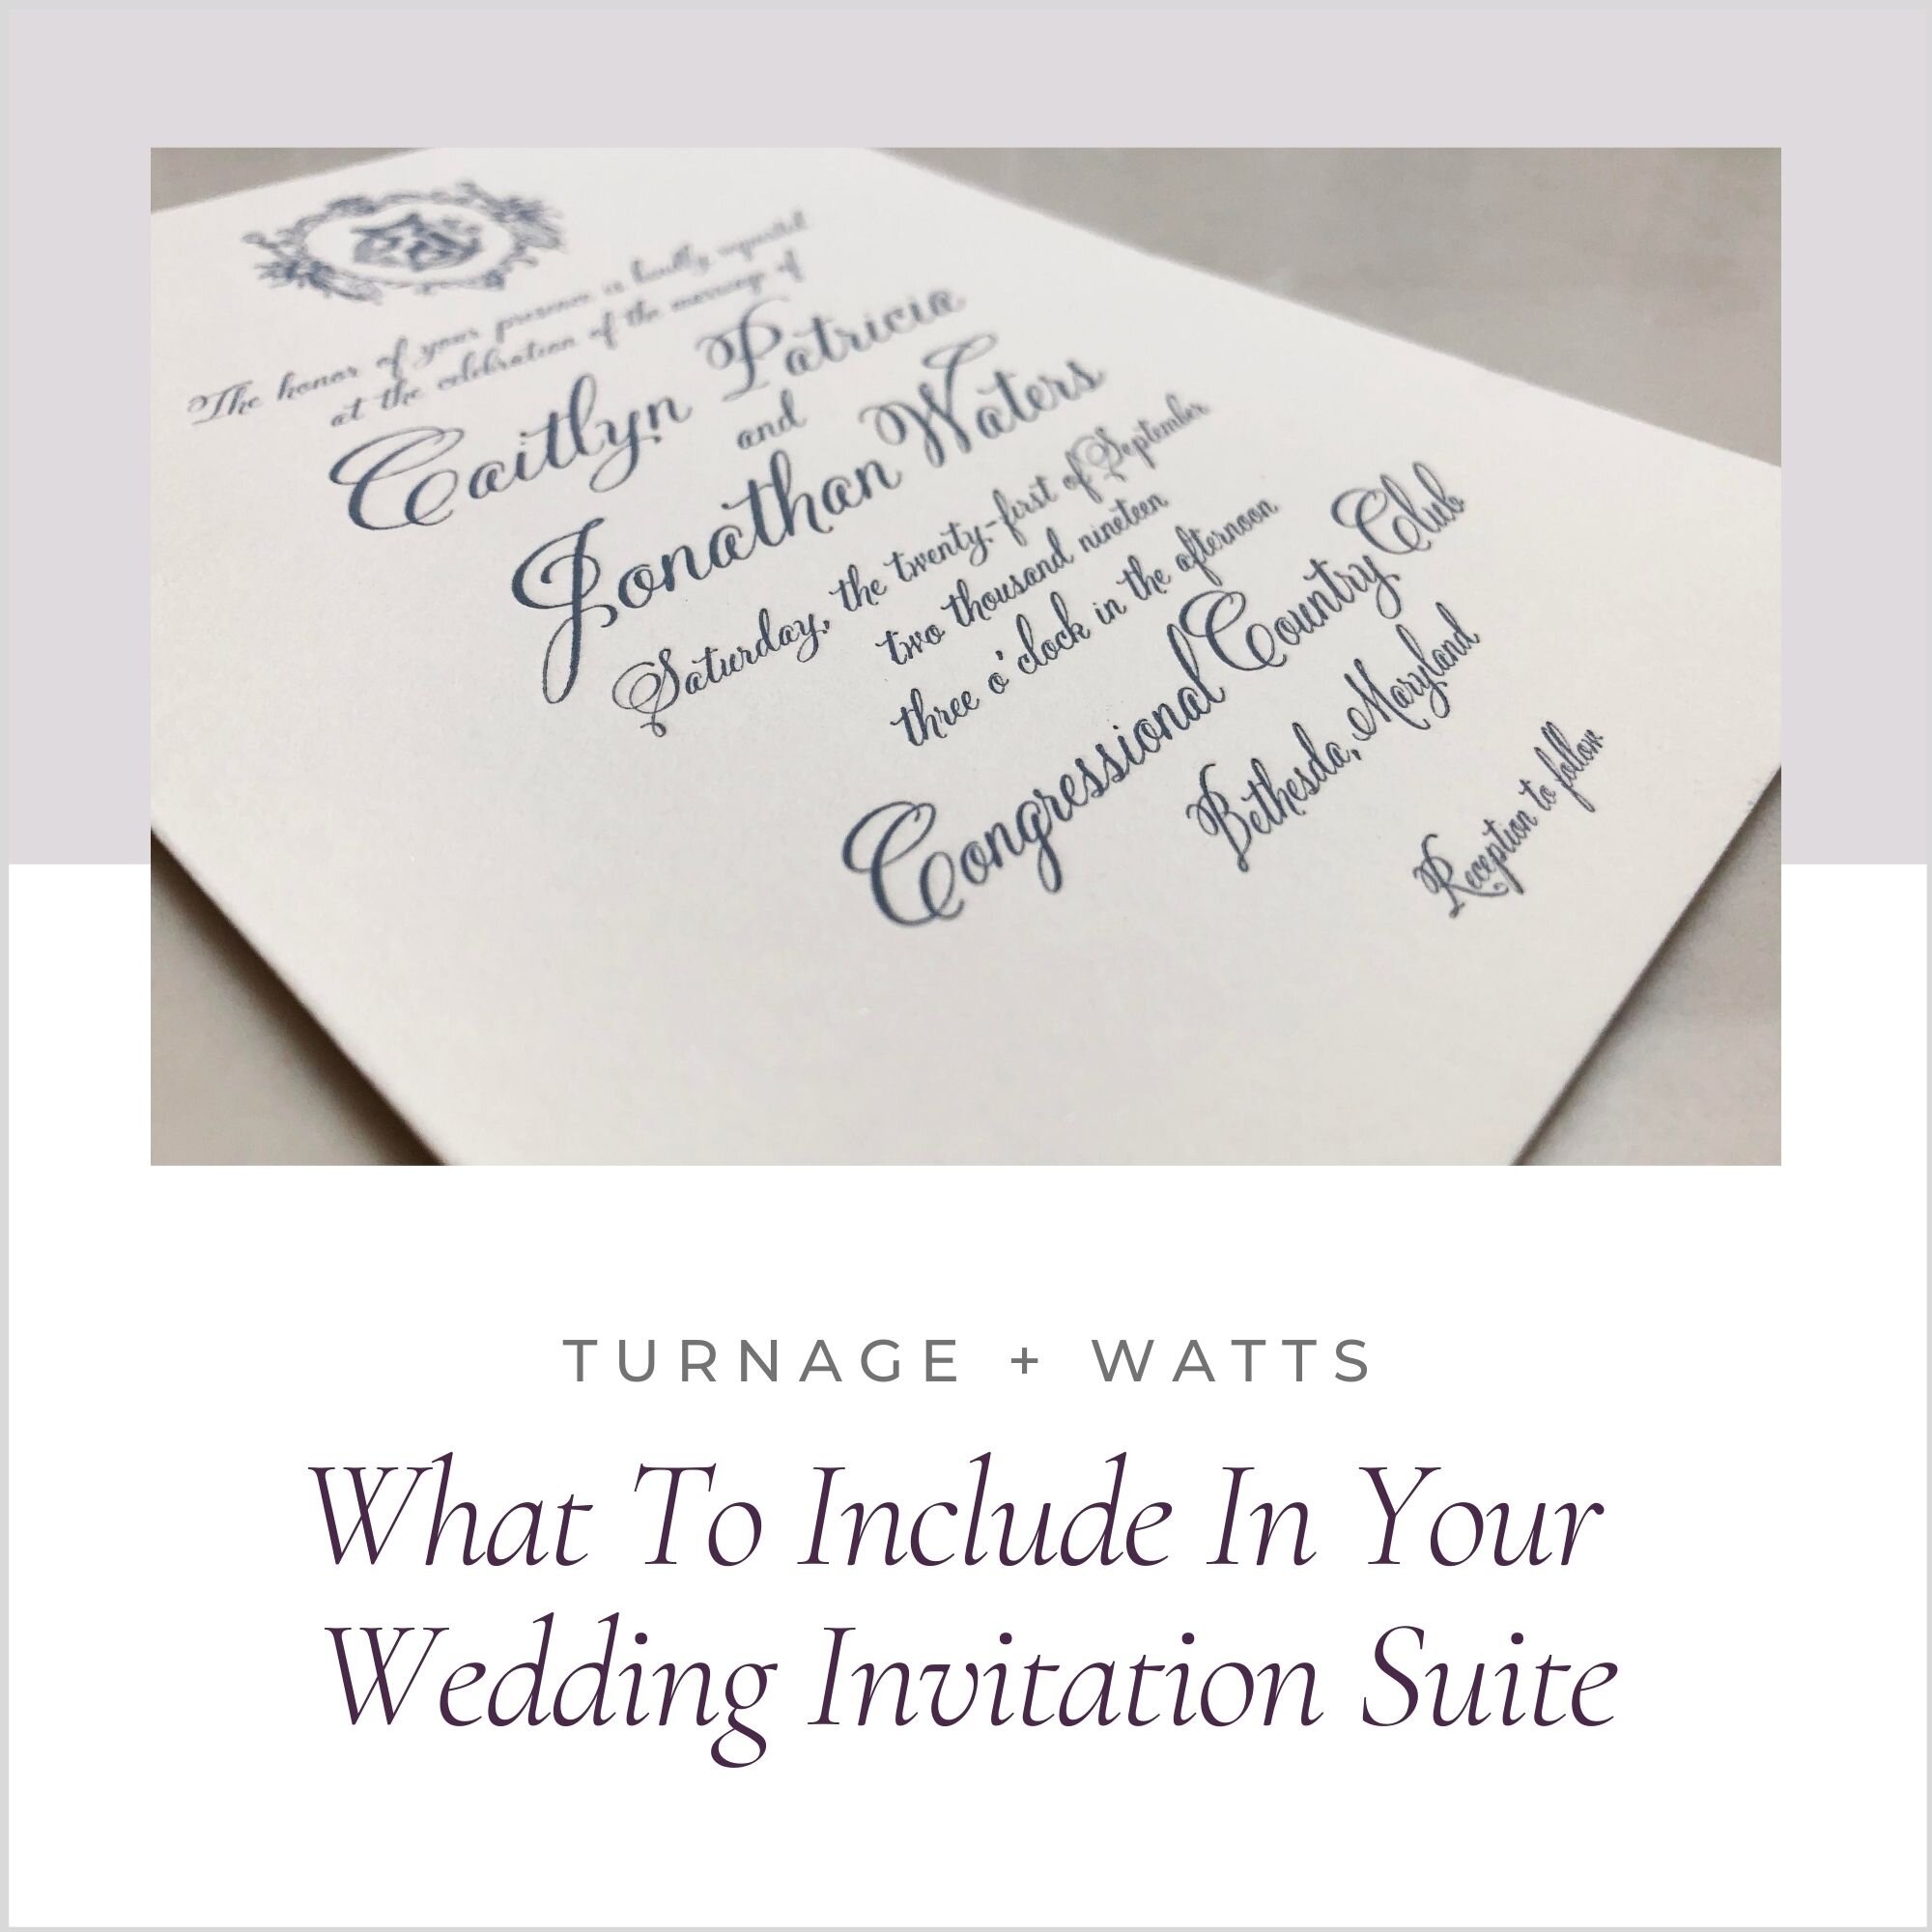 BLOG+What+To+Include+In+Your+Wedding+Invitation Suite.jpg